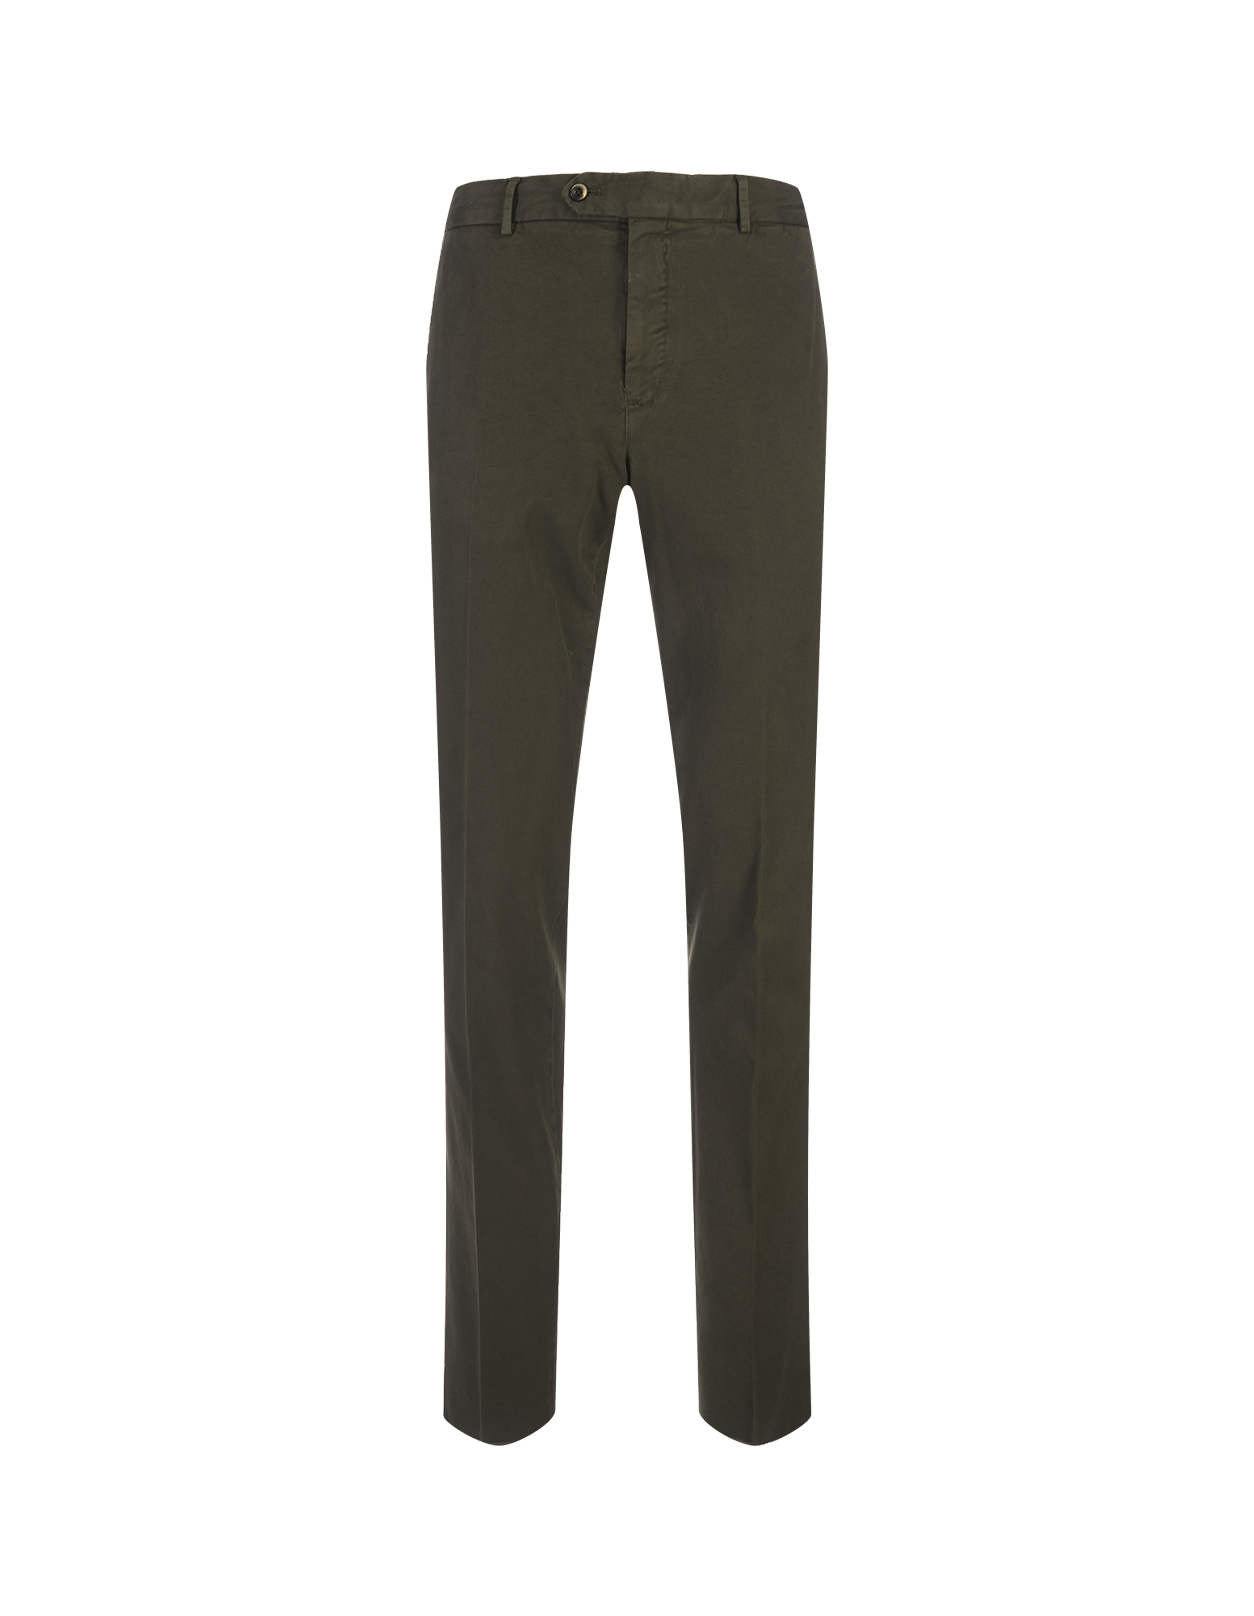 Green Cotton and Cashmere Blend Trousers